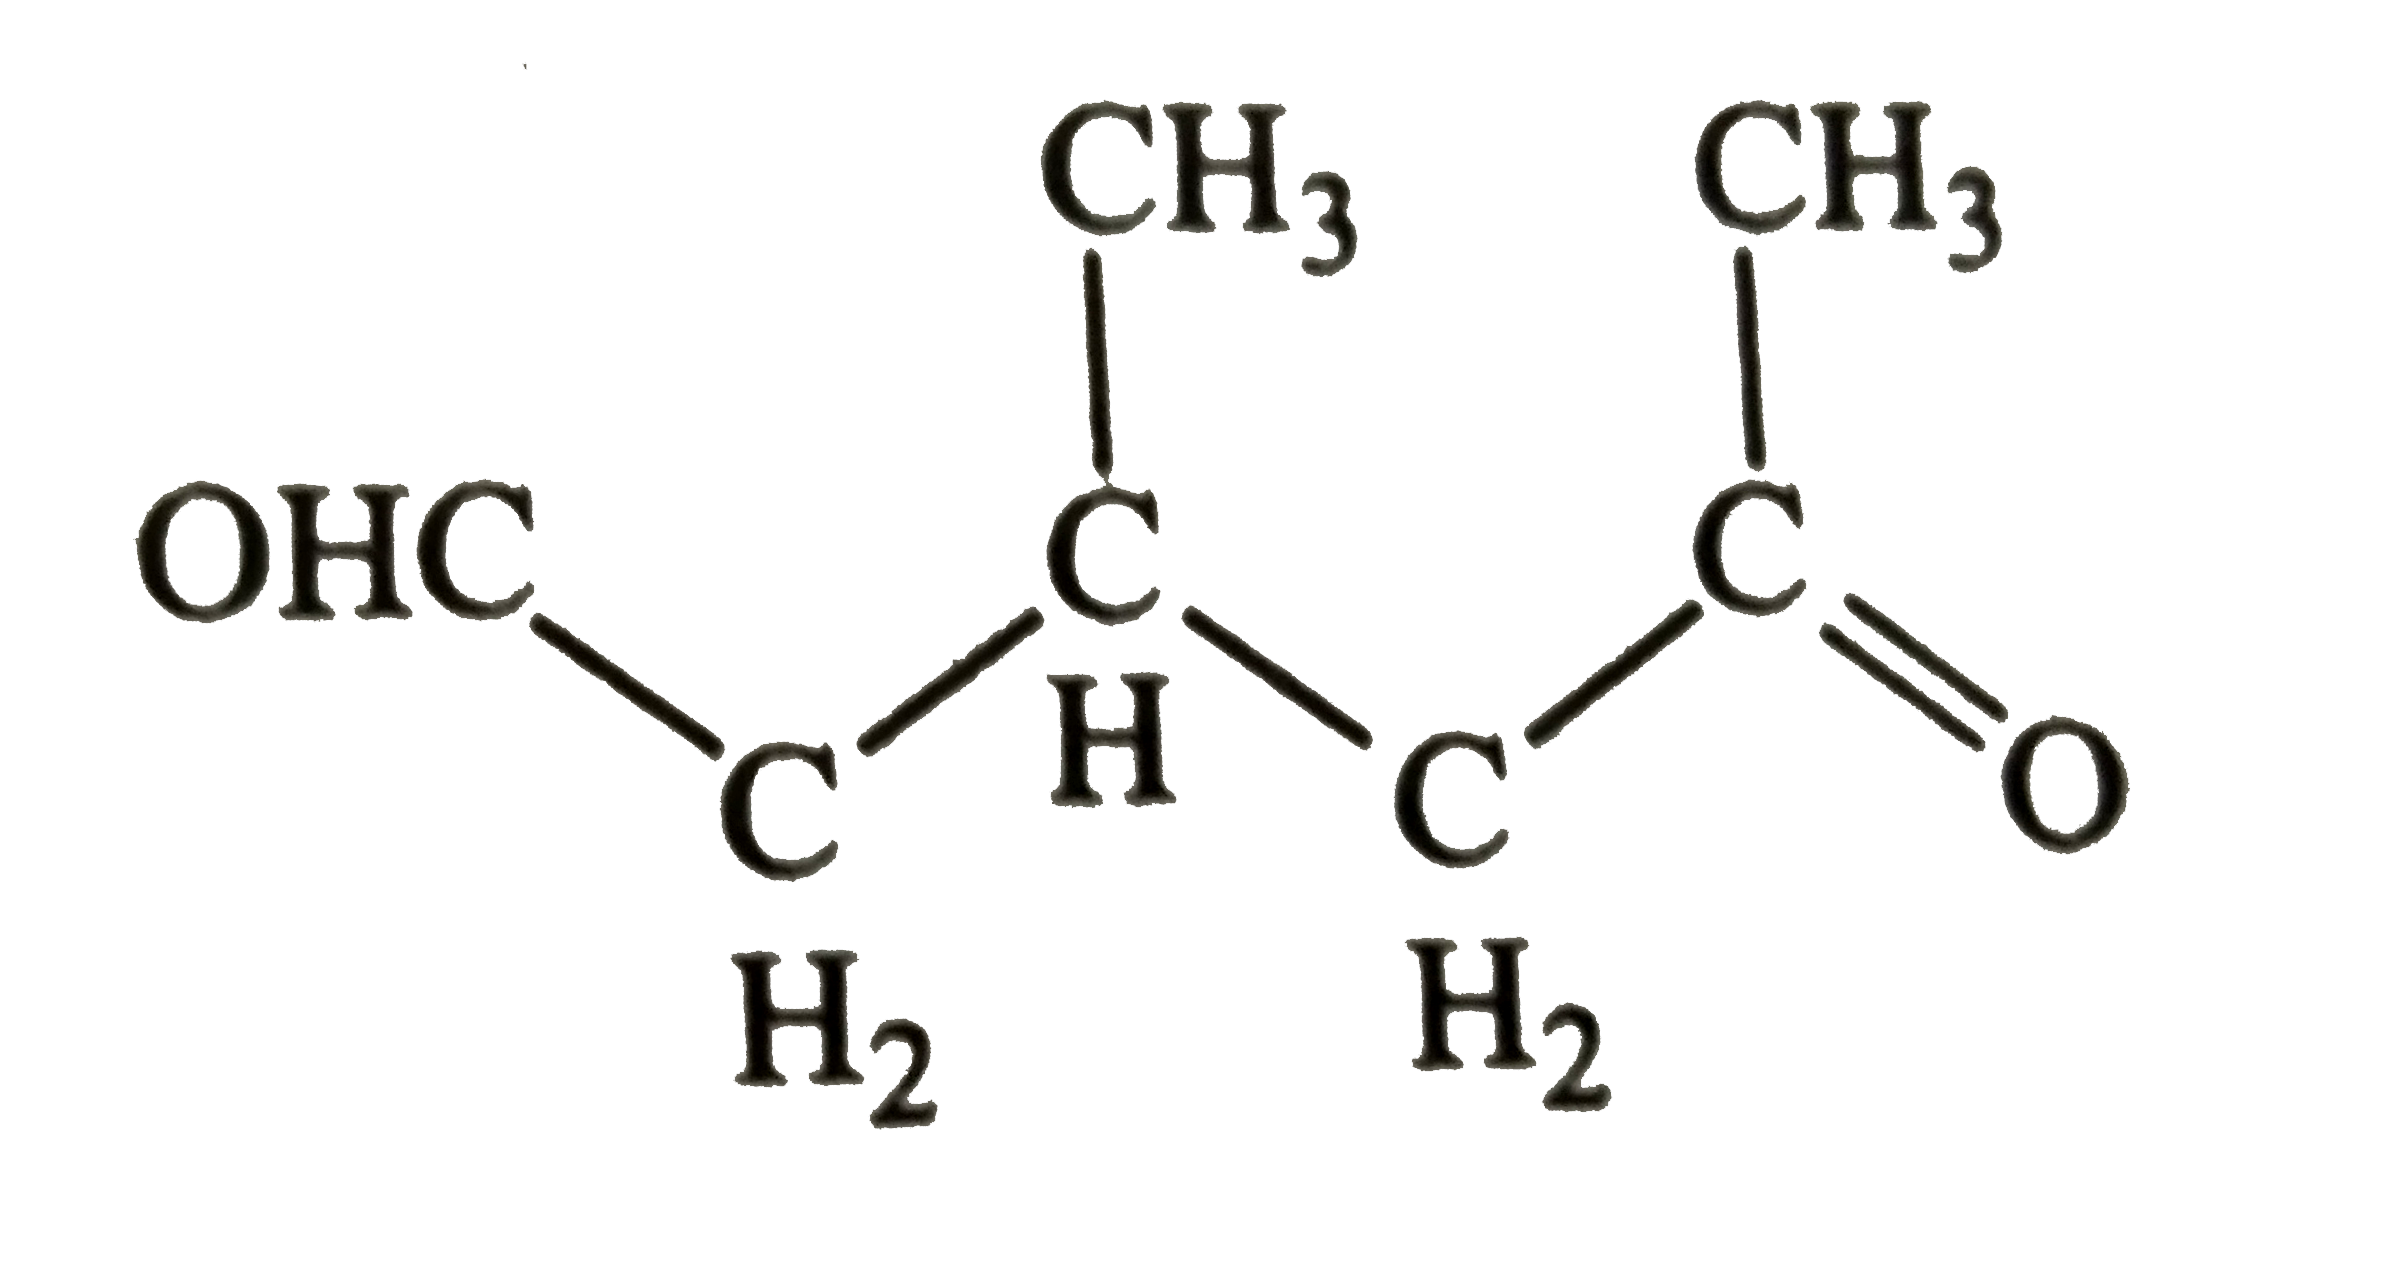 A single compound of the structure.    is obtainable from ozonolysis of which of the following cyclic compounds ?